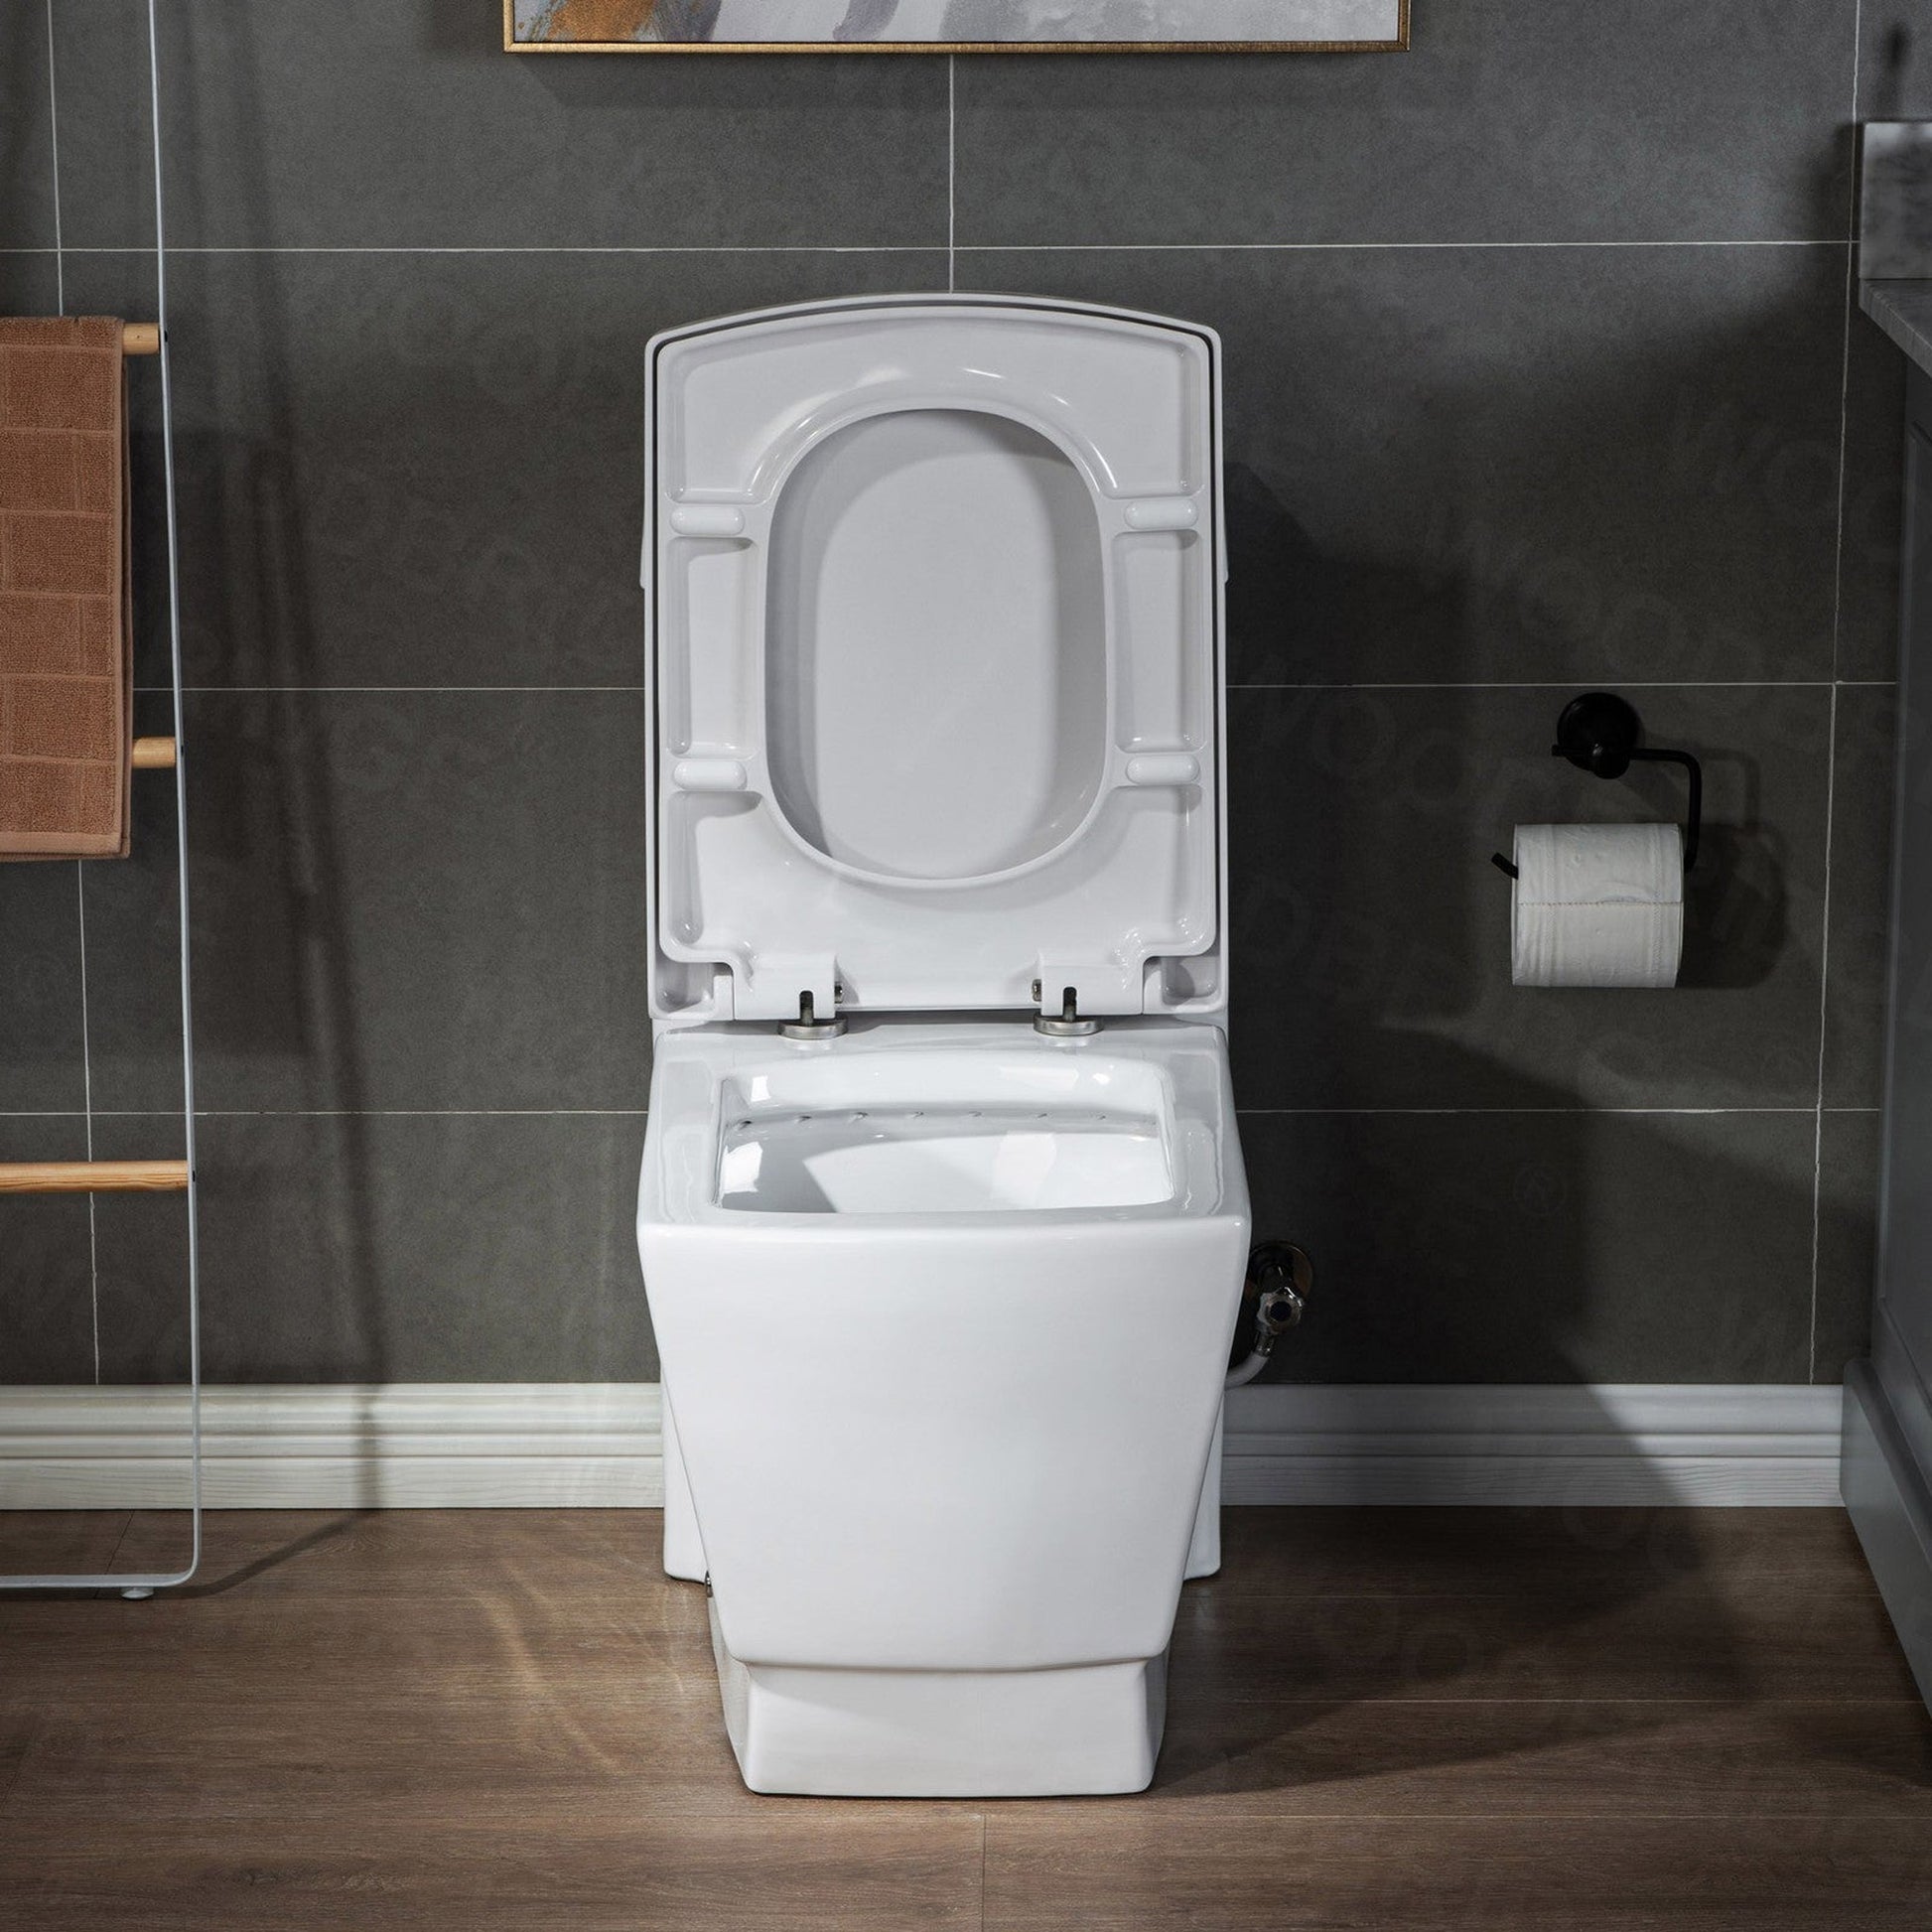 WoodBridge T0020-BG Modern Square Design One Piece Dual Flush 1.28 GP Toilet, Chair Height With Soft Closing Seat and Brushed Gold Button